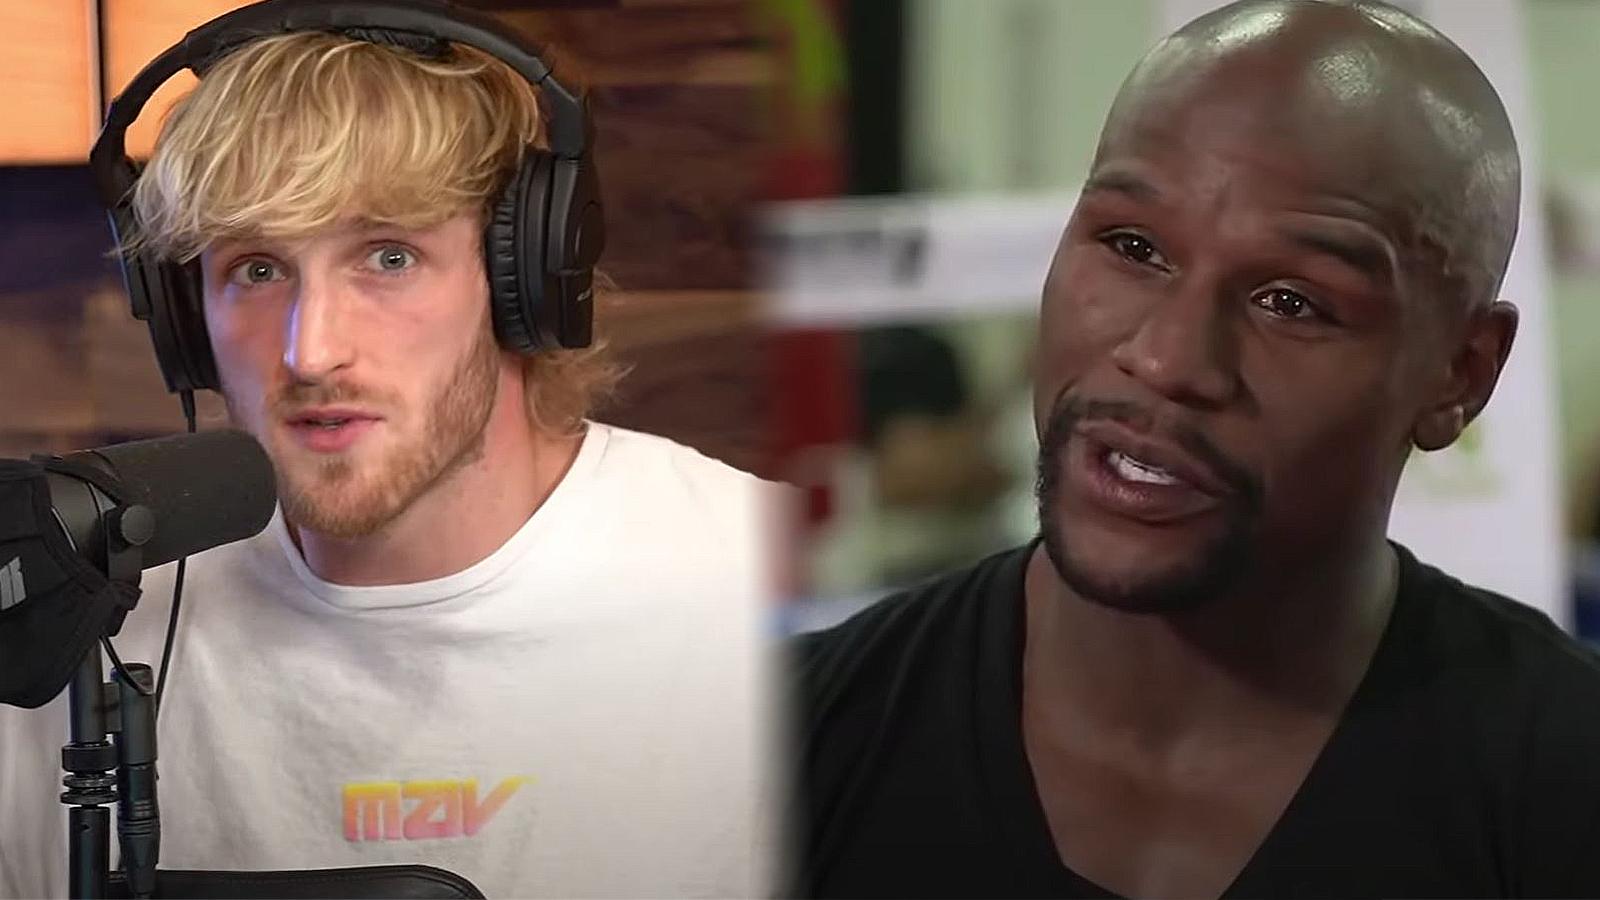 Floyd Mayweather reveals monthly income after Jake & Logan Paul